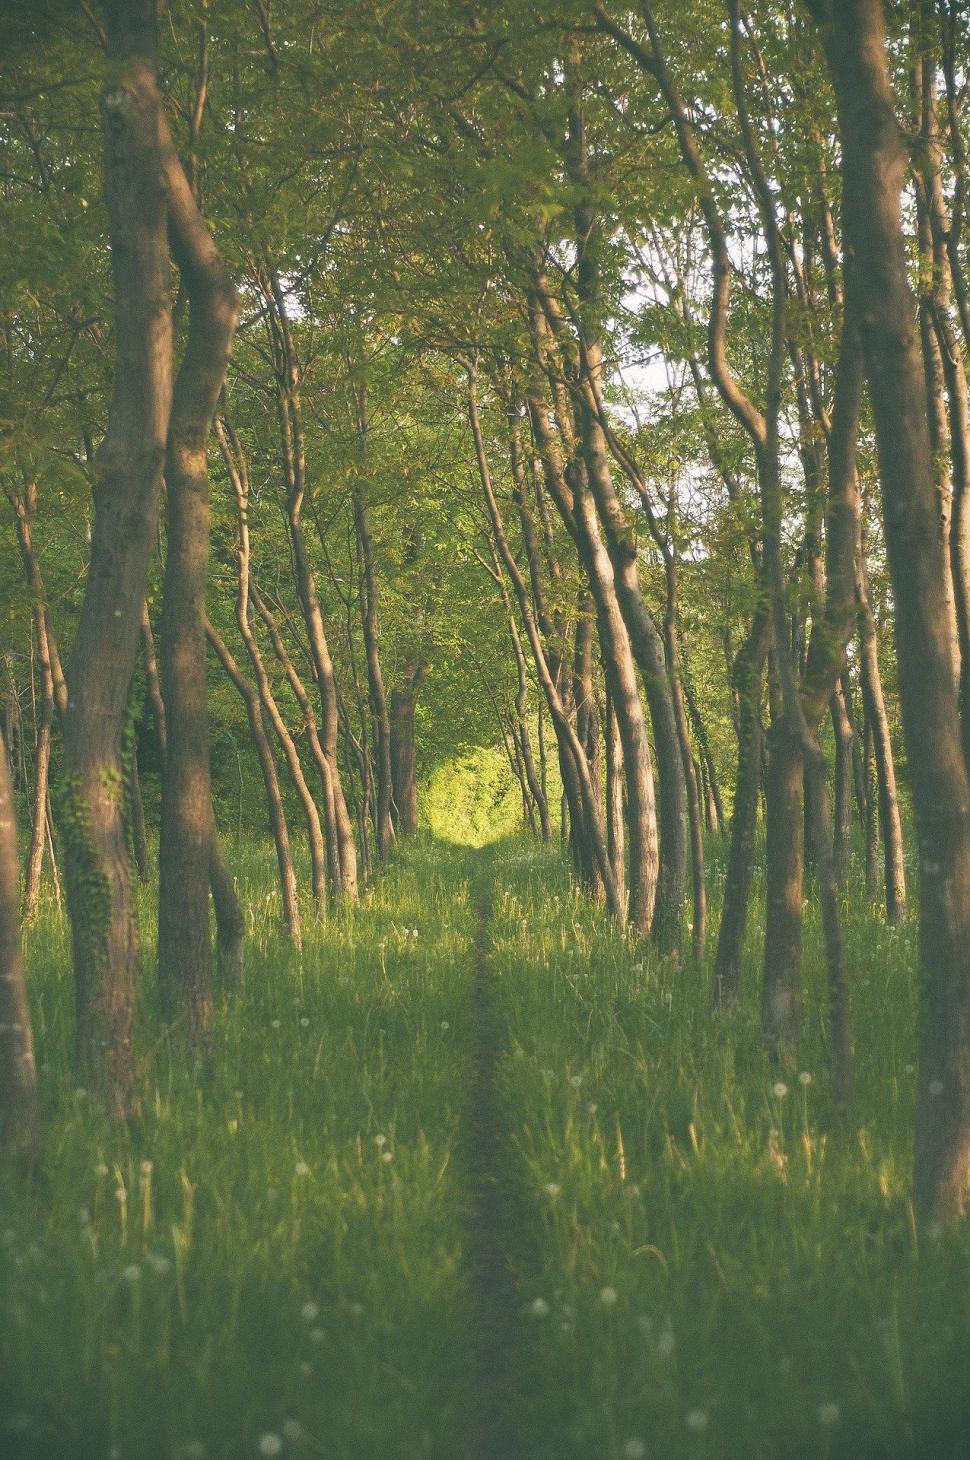 Free Image of Dense Green Forest With Numerous Trees 